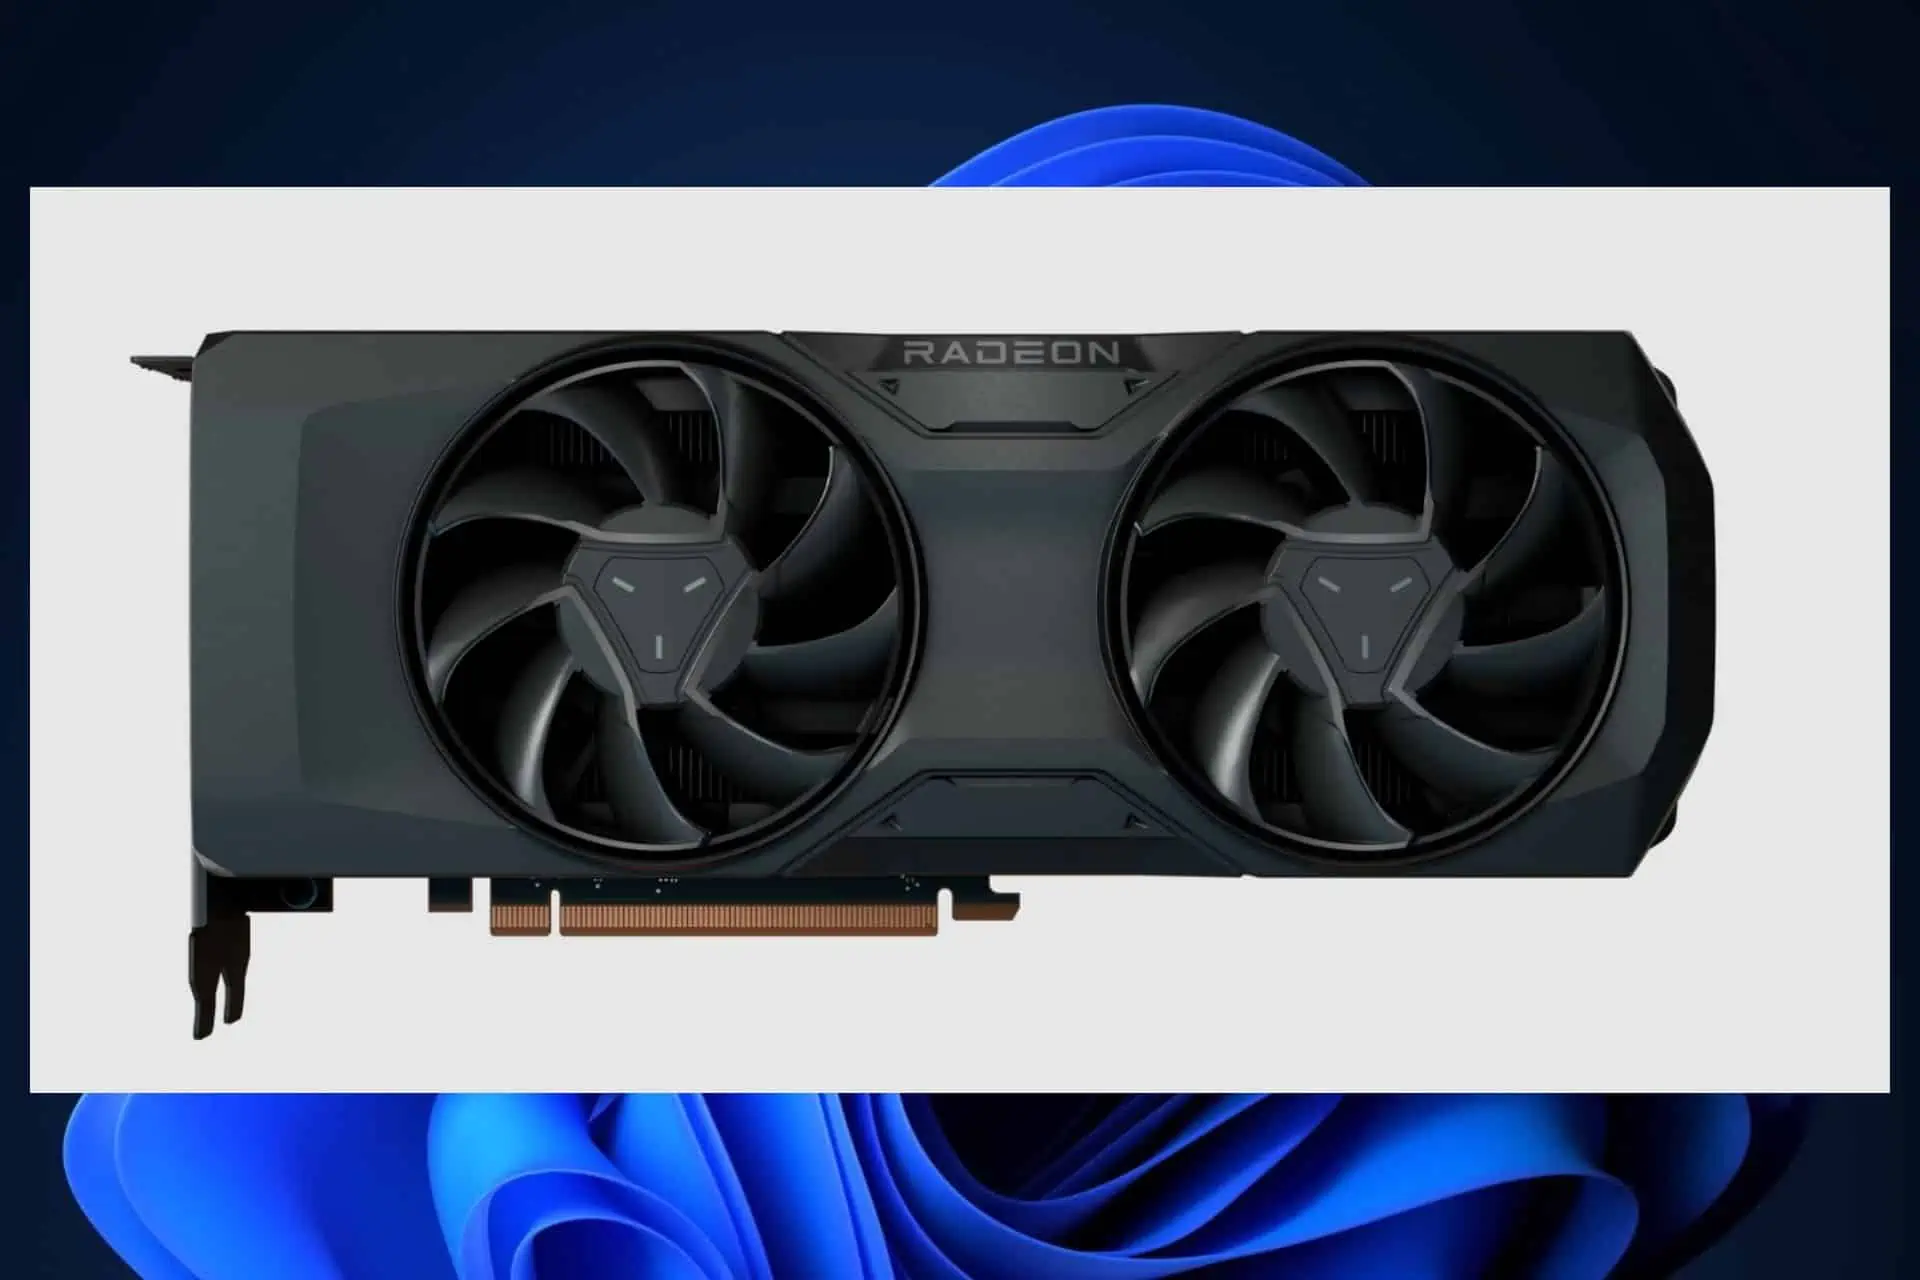 AMD Radeon RX 7800 XT and Radeon RX 7700 XT Graphics Cards are here and AMD promises incredible performance at an affordable price